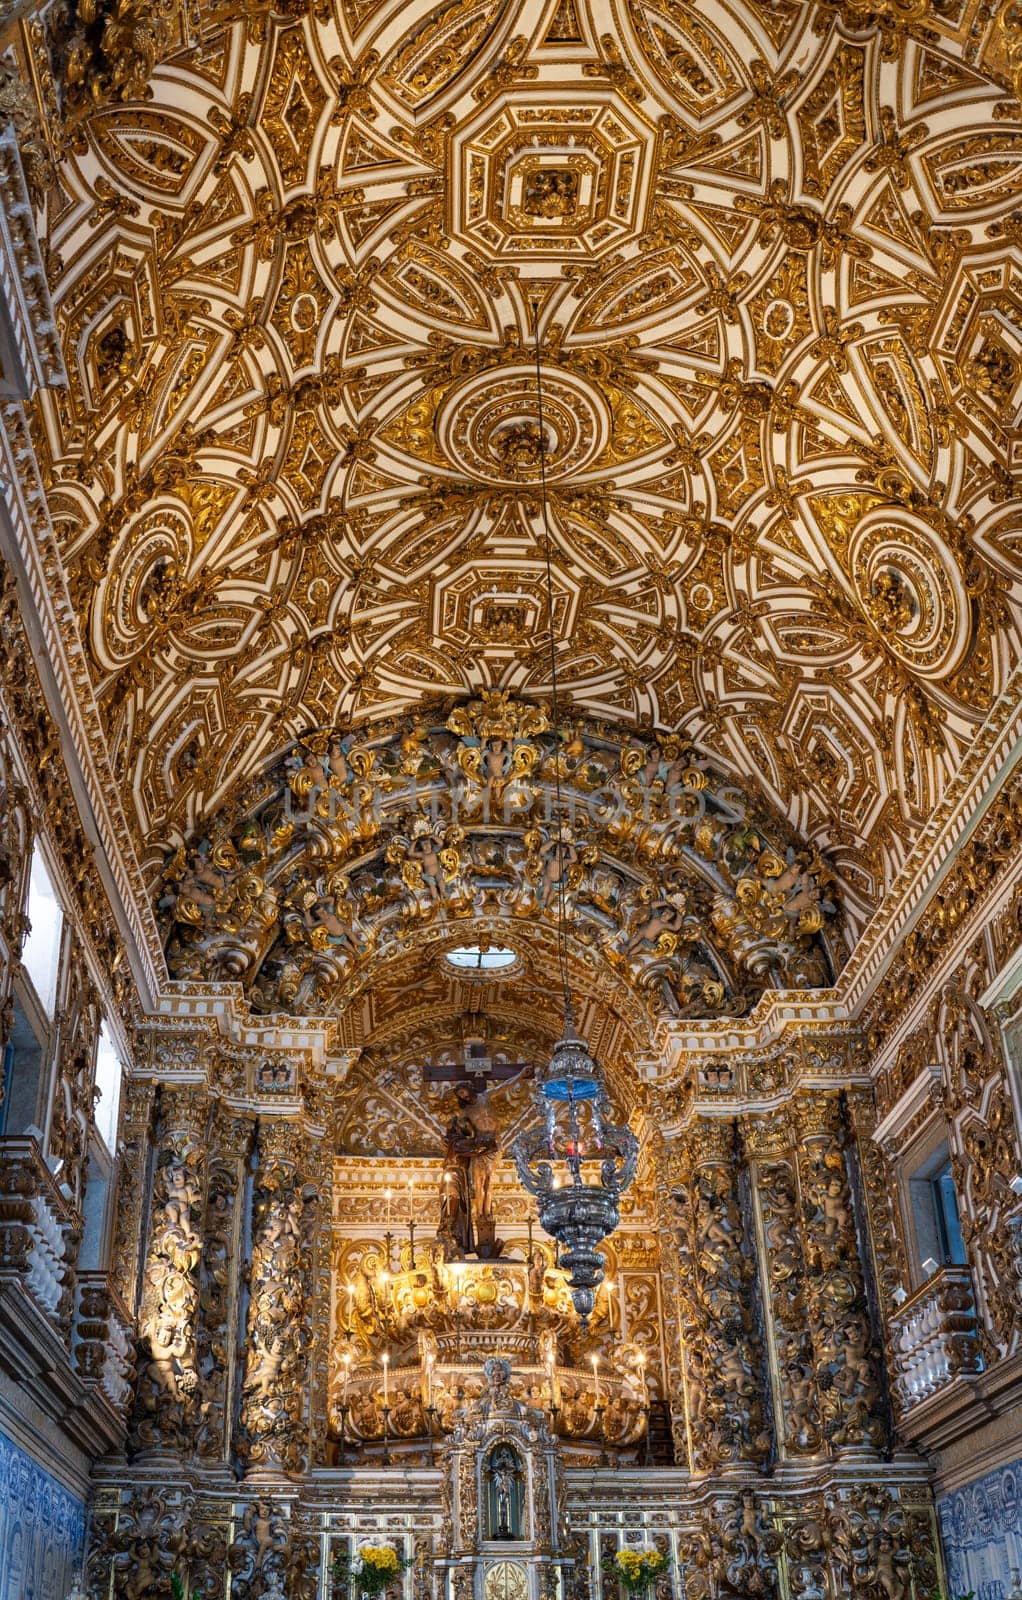 Baroque ceiling with gold leaf in historic church.